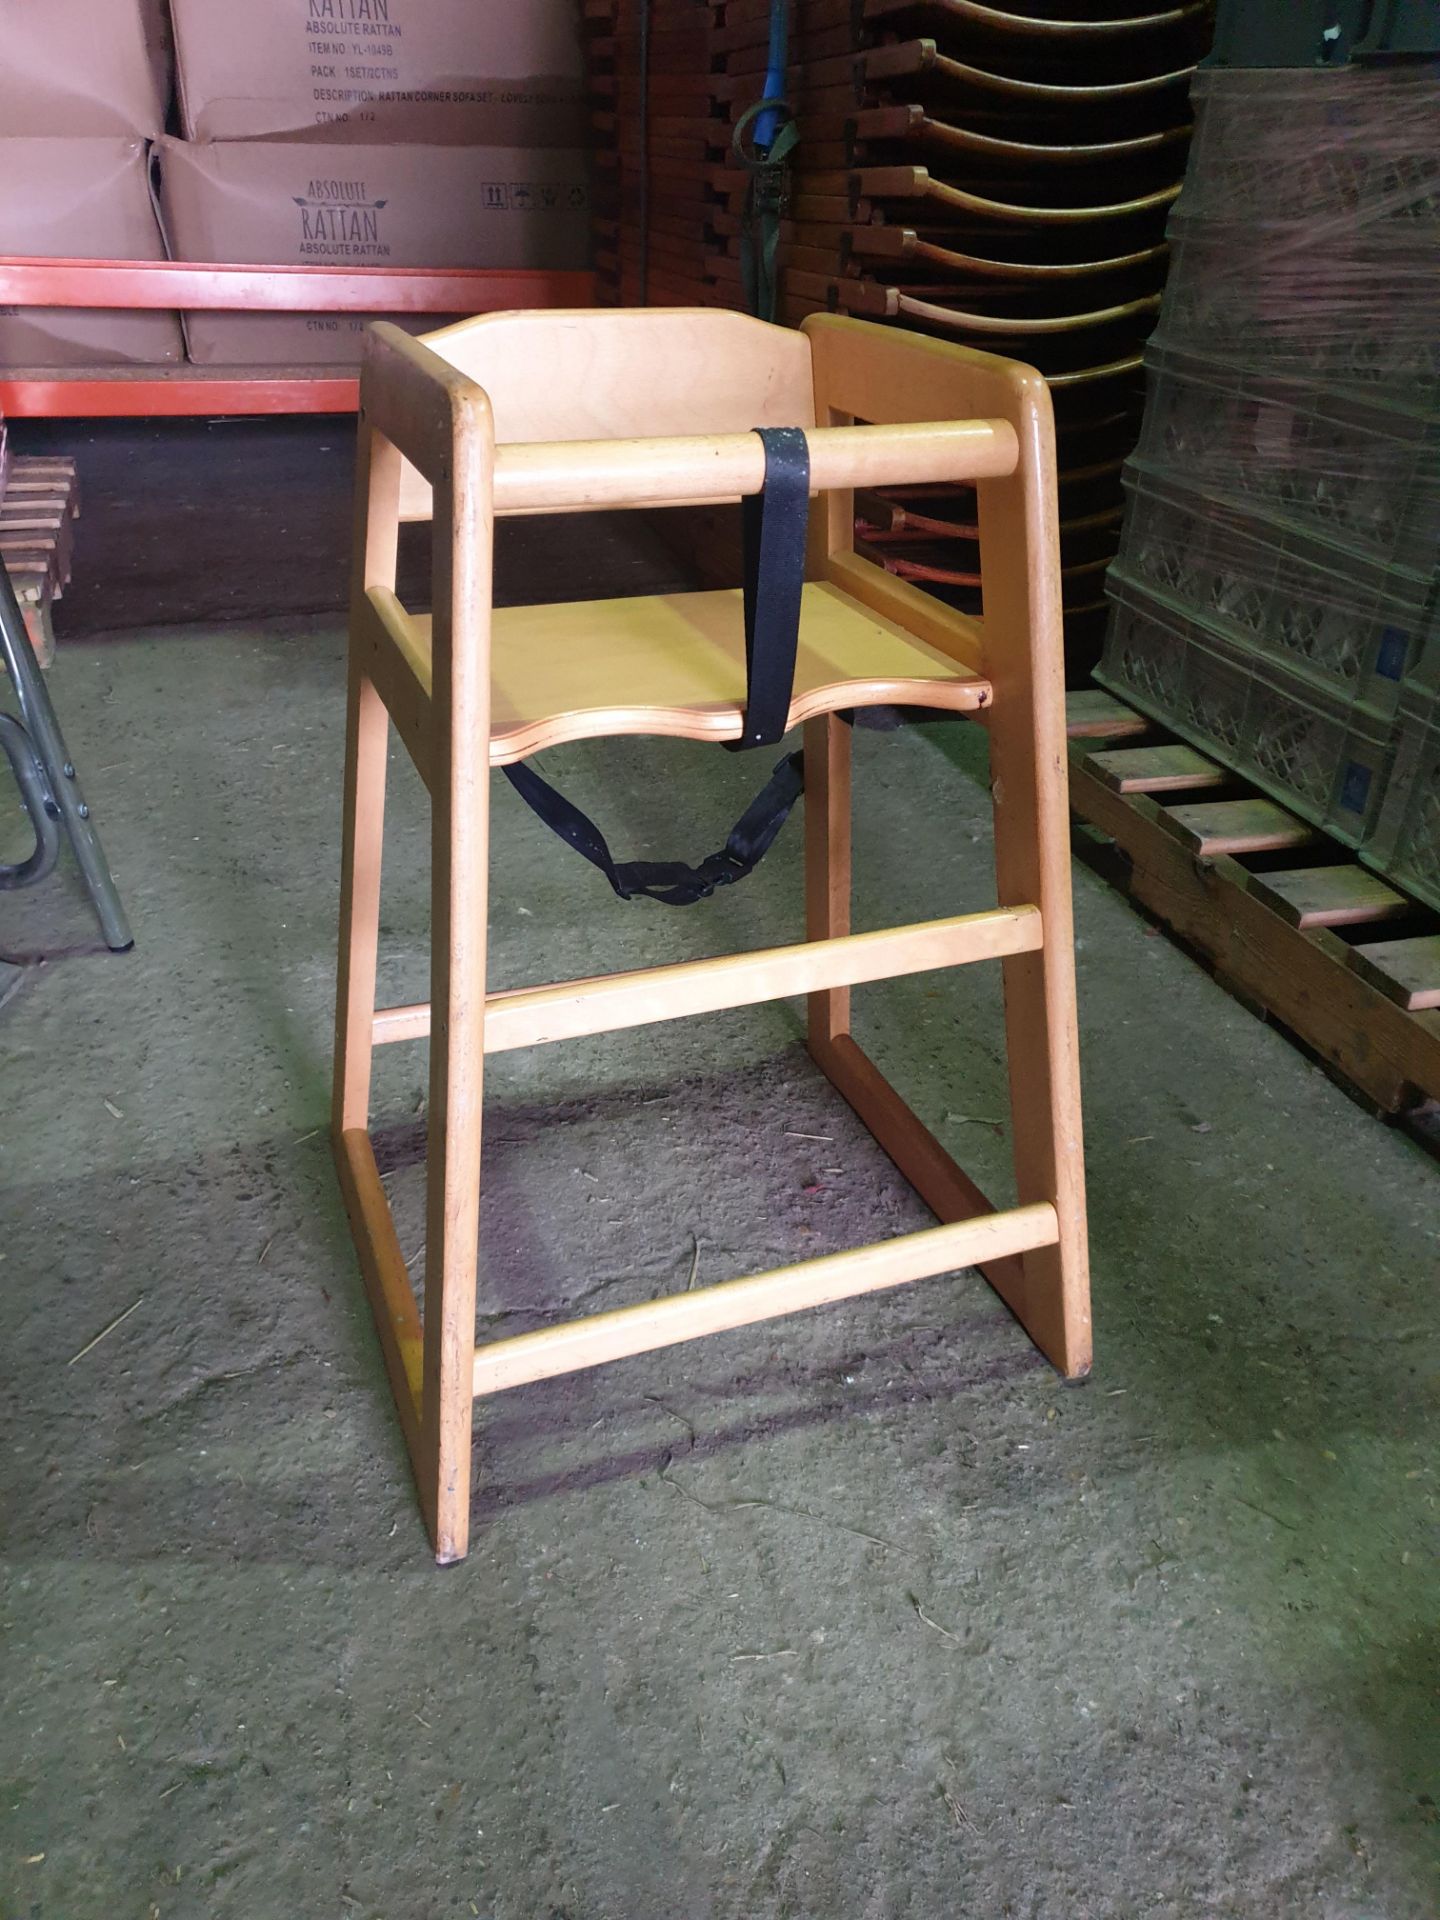 * Childs High Chair with Strap